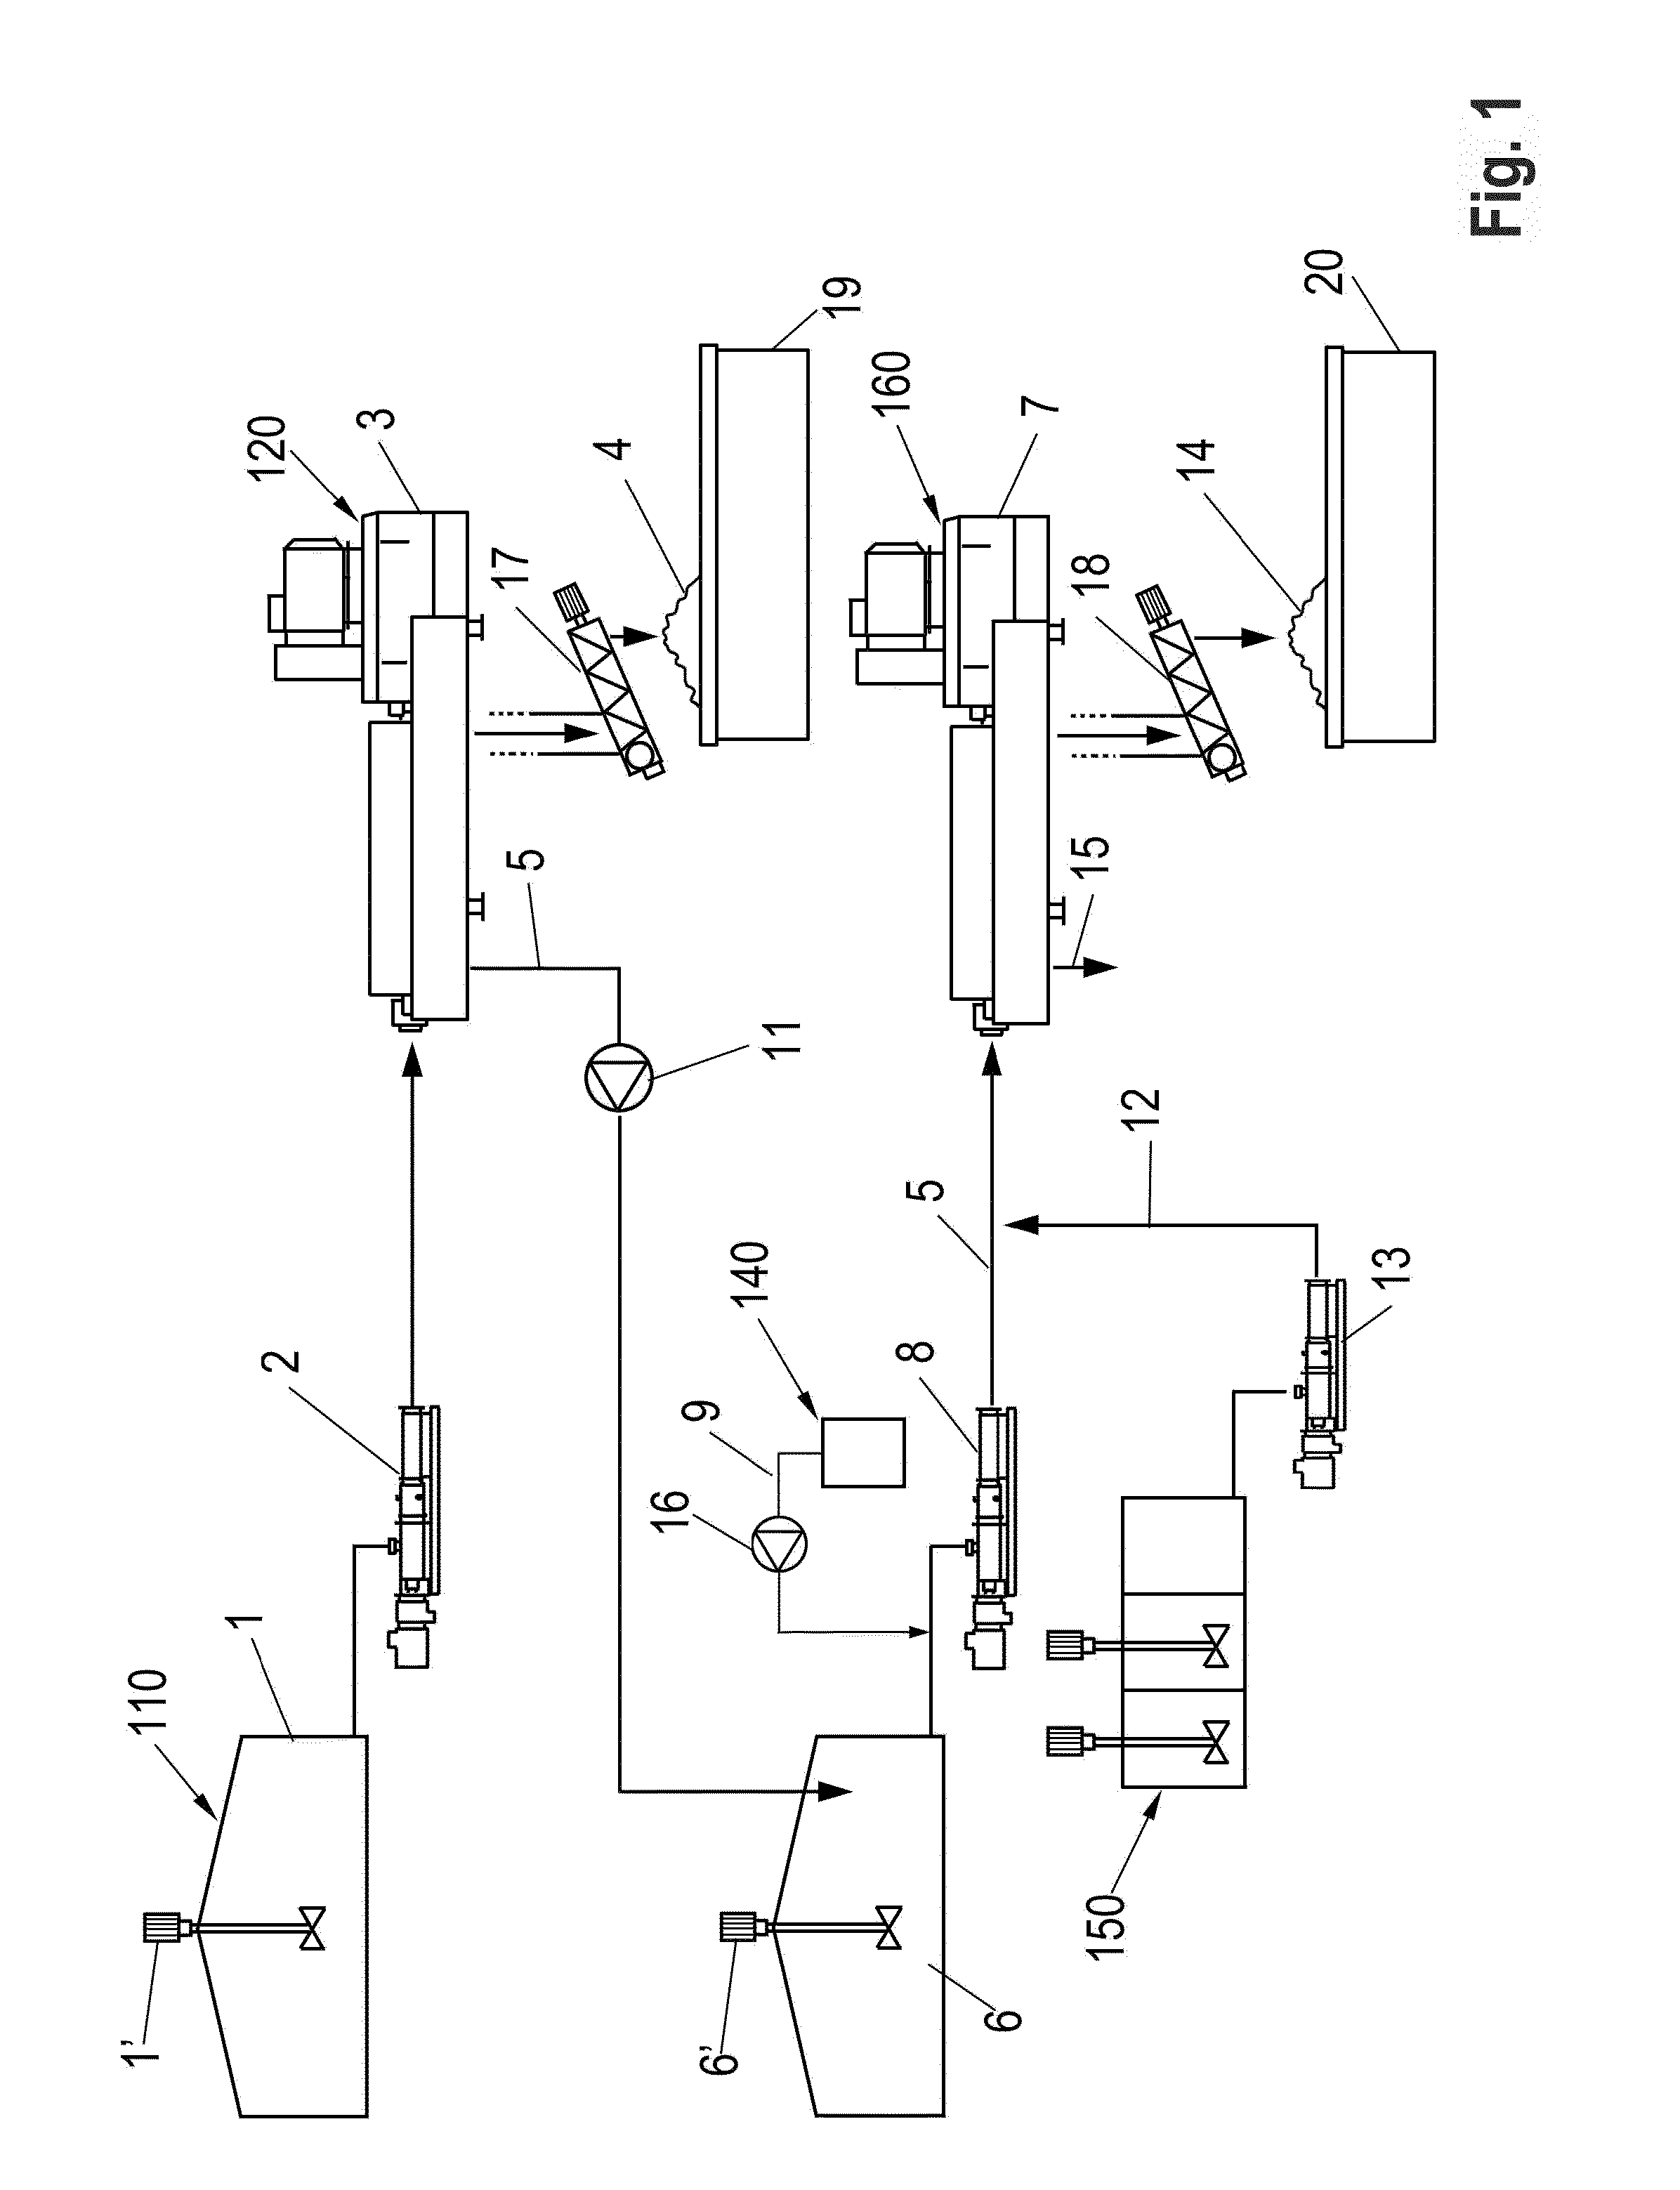 Method and Installation for Processing Raw Liquid Manure and/or Fermentation Residues from Biogas Production